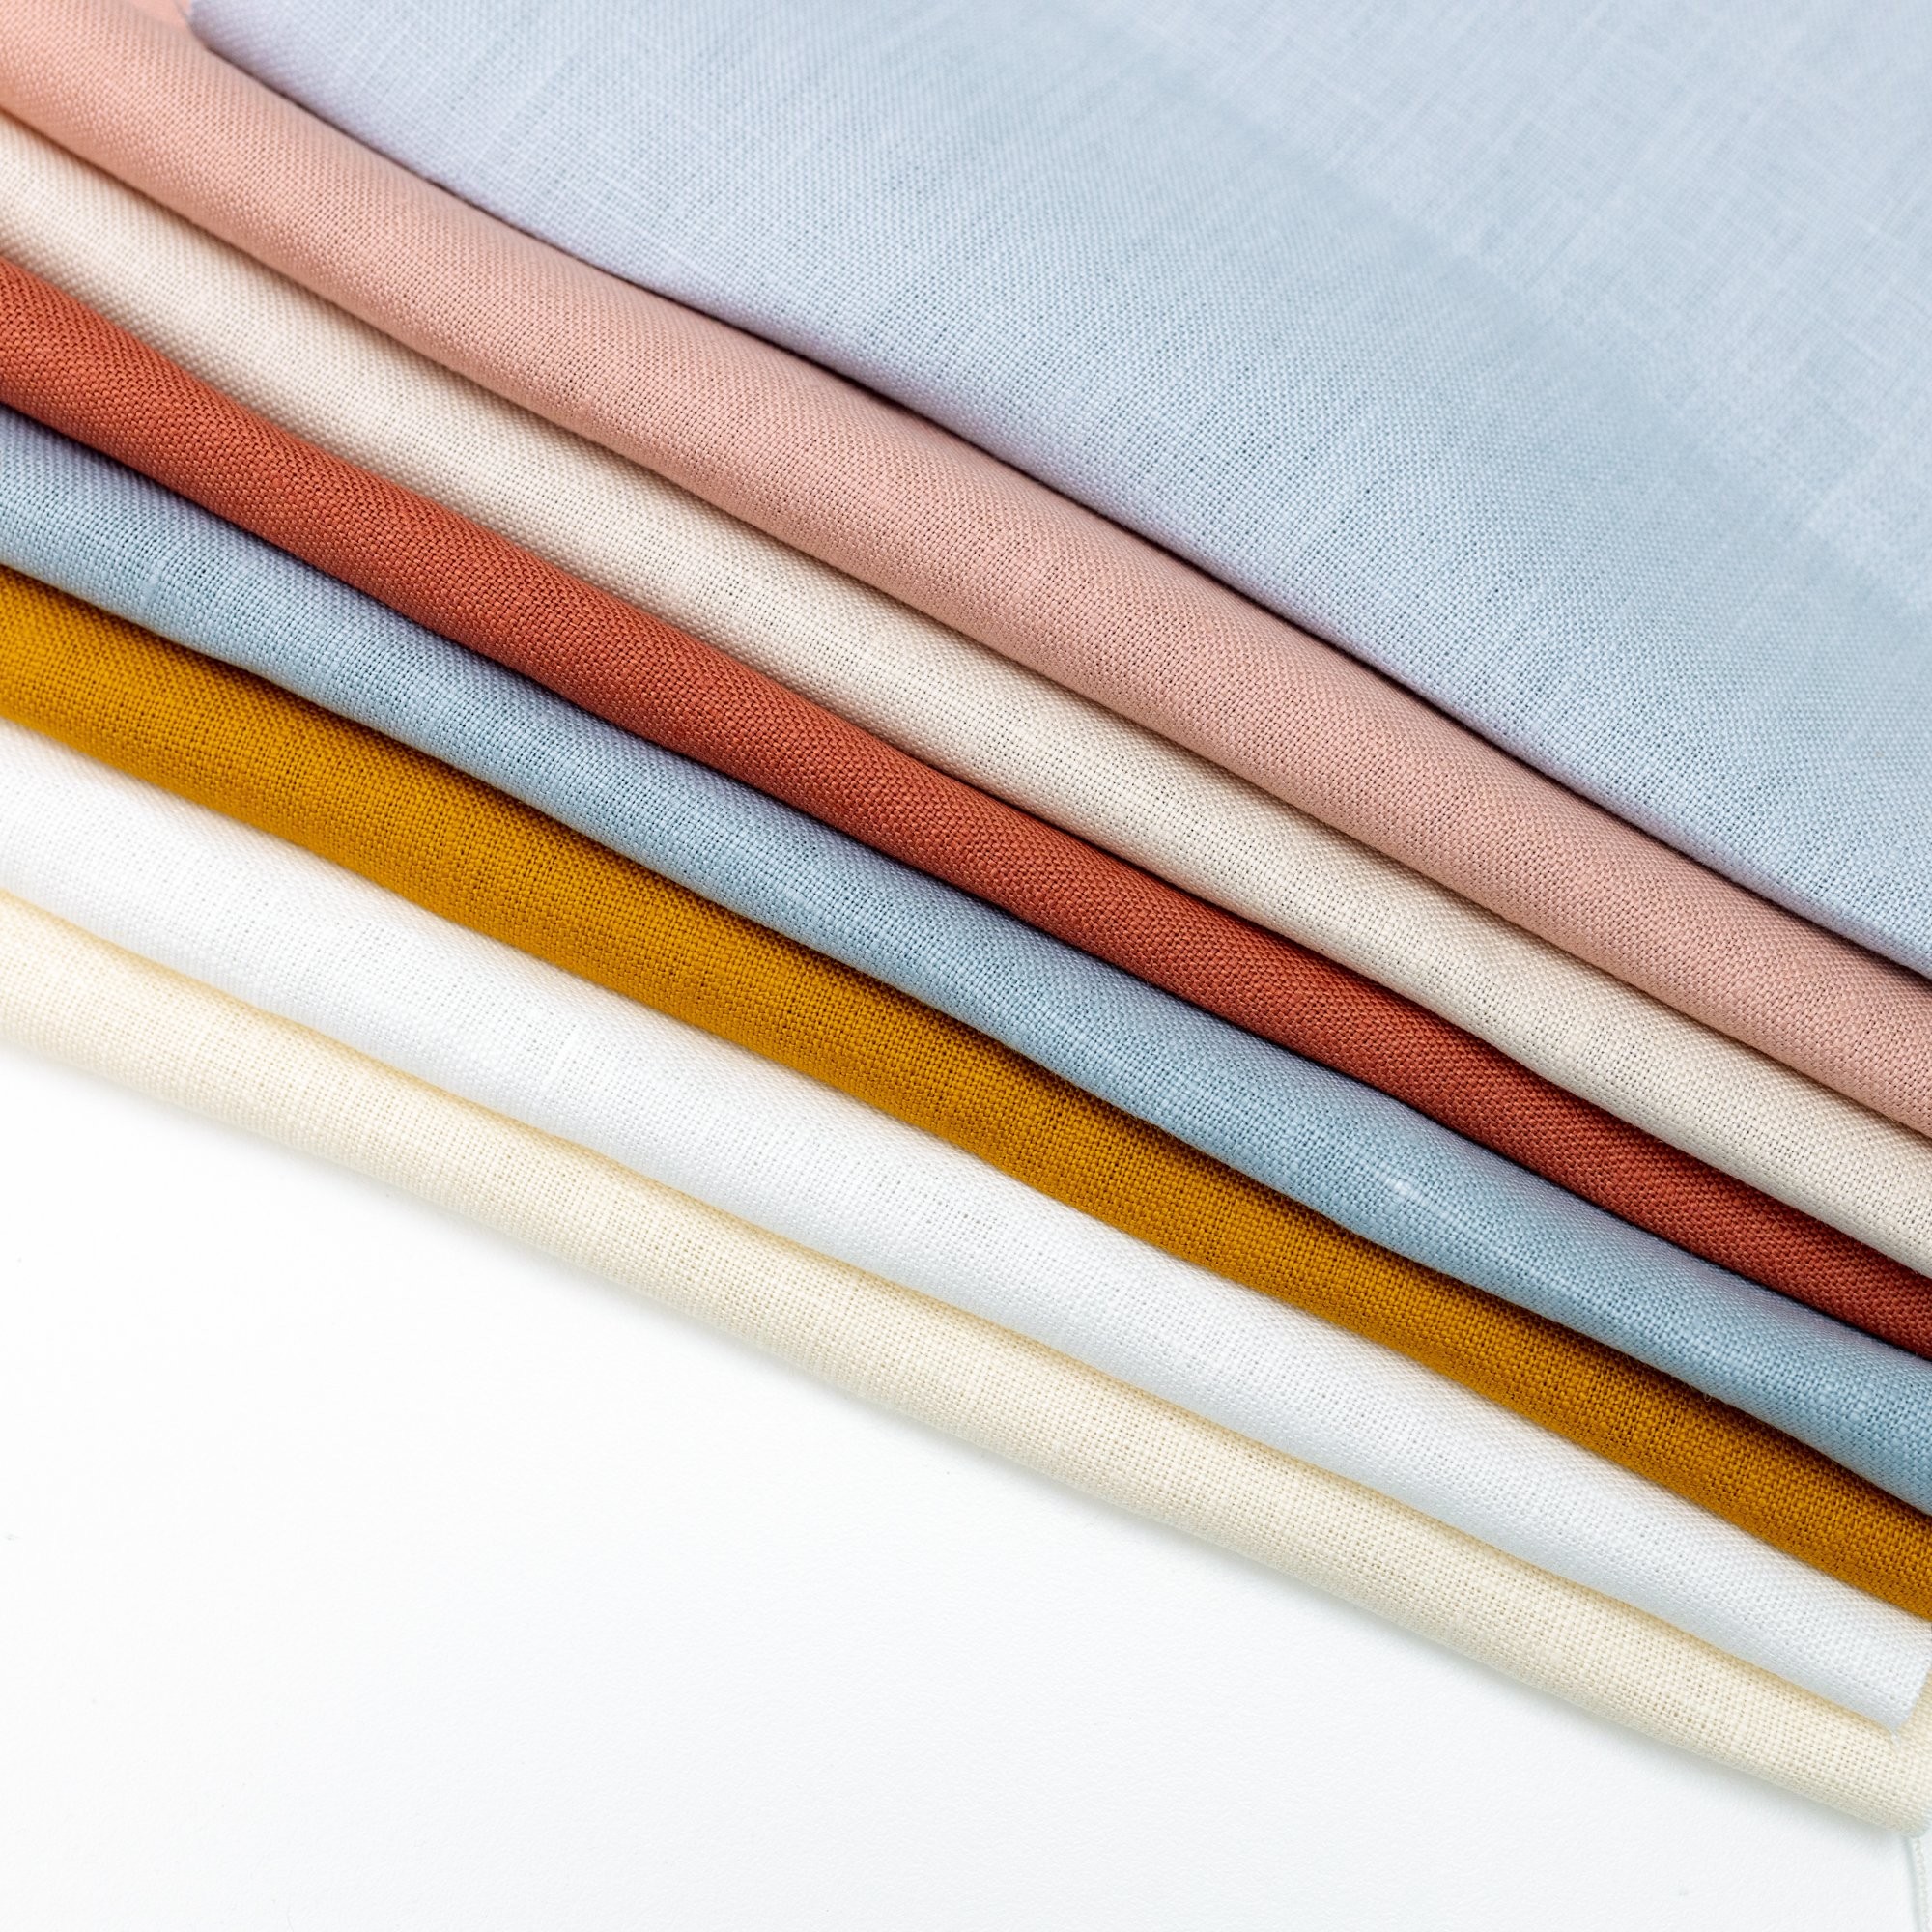 This image shows different coloured linens stacked on top of each other, available for purchase from the Clever Poppy Shop.